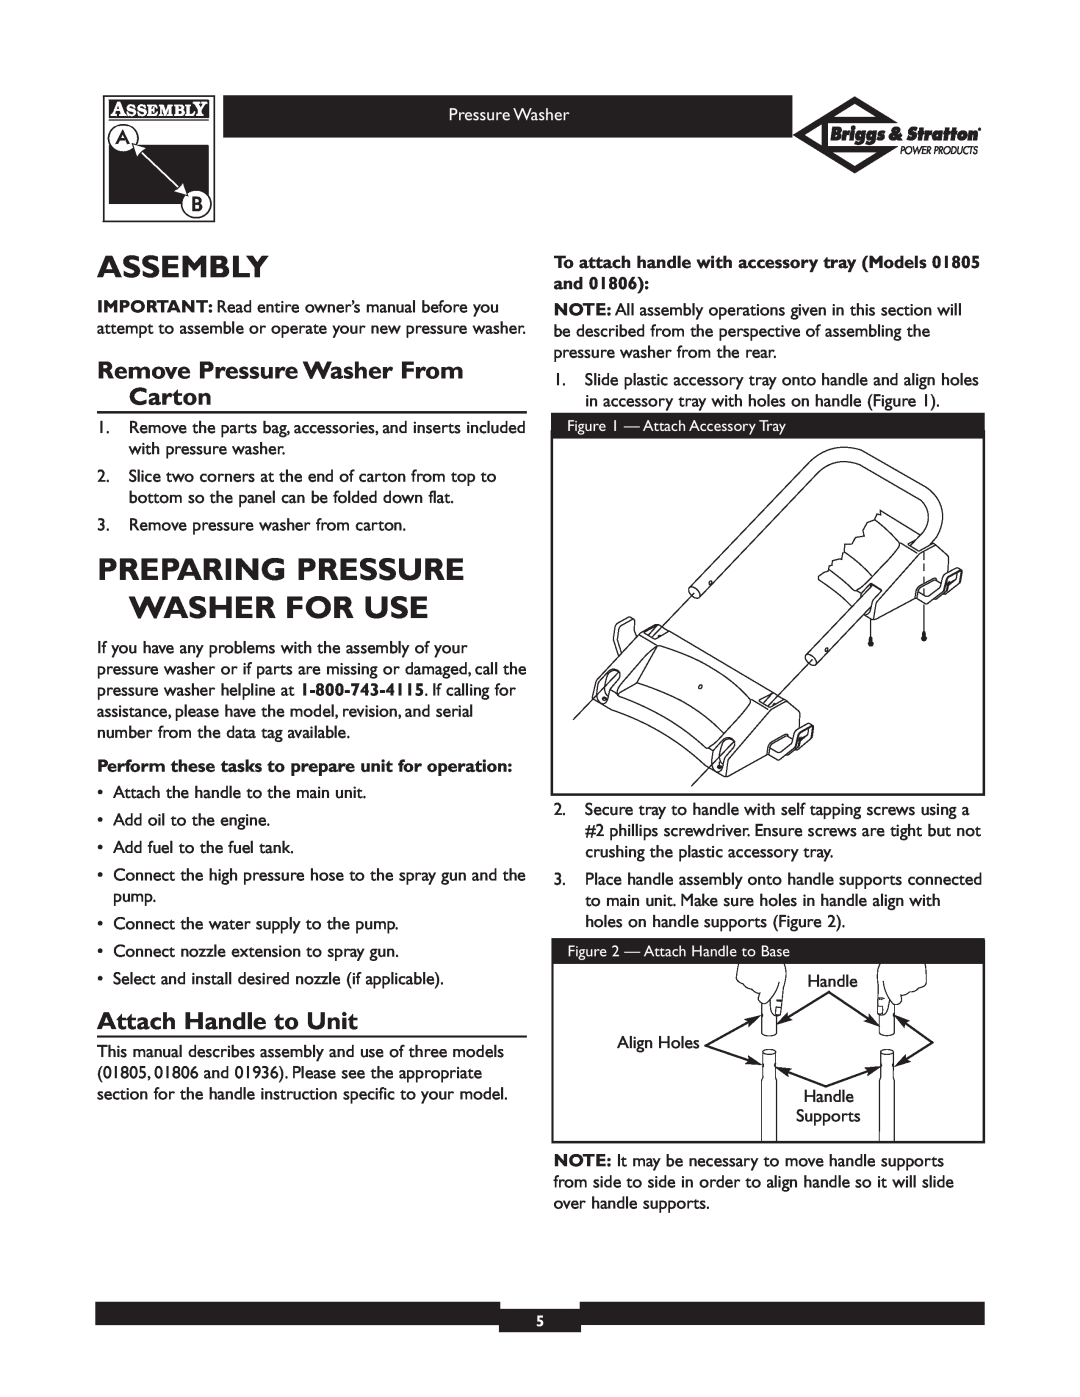 Briggs & Stratton 01806, 01805 owner manual Assembly, Preparing Pressure Washer For Use, Remove Pressure Washer From Carton 